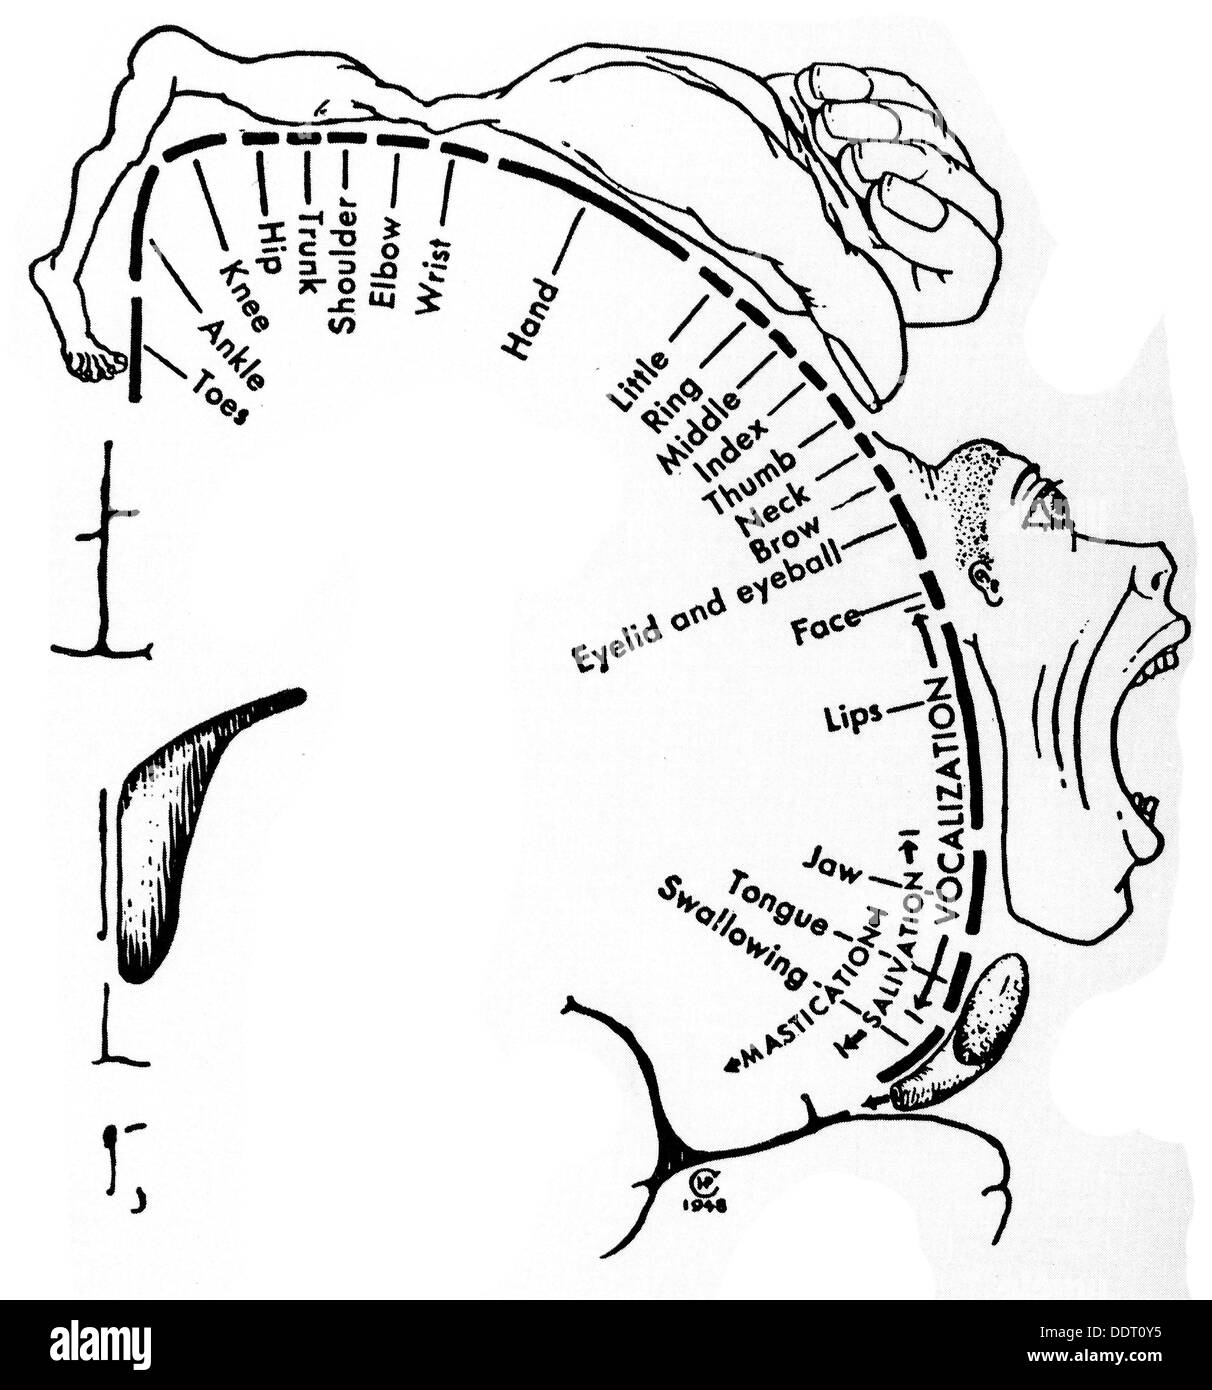 medicine, anatomy, cerebric / cranium, scales of the motor sectors of the cortex, drawing, from: Wilder Penfield, Theodore Rasmussen, "The Cerebral Cortex of Man", New York, 1950, Additional-Rights-Clearences-Not Available Stock Photo